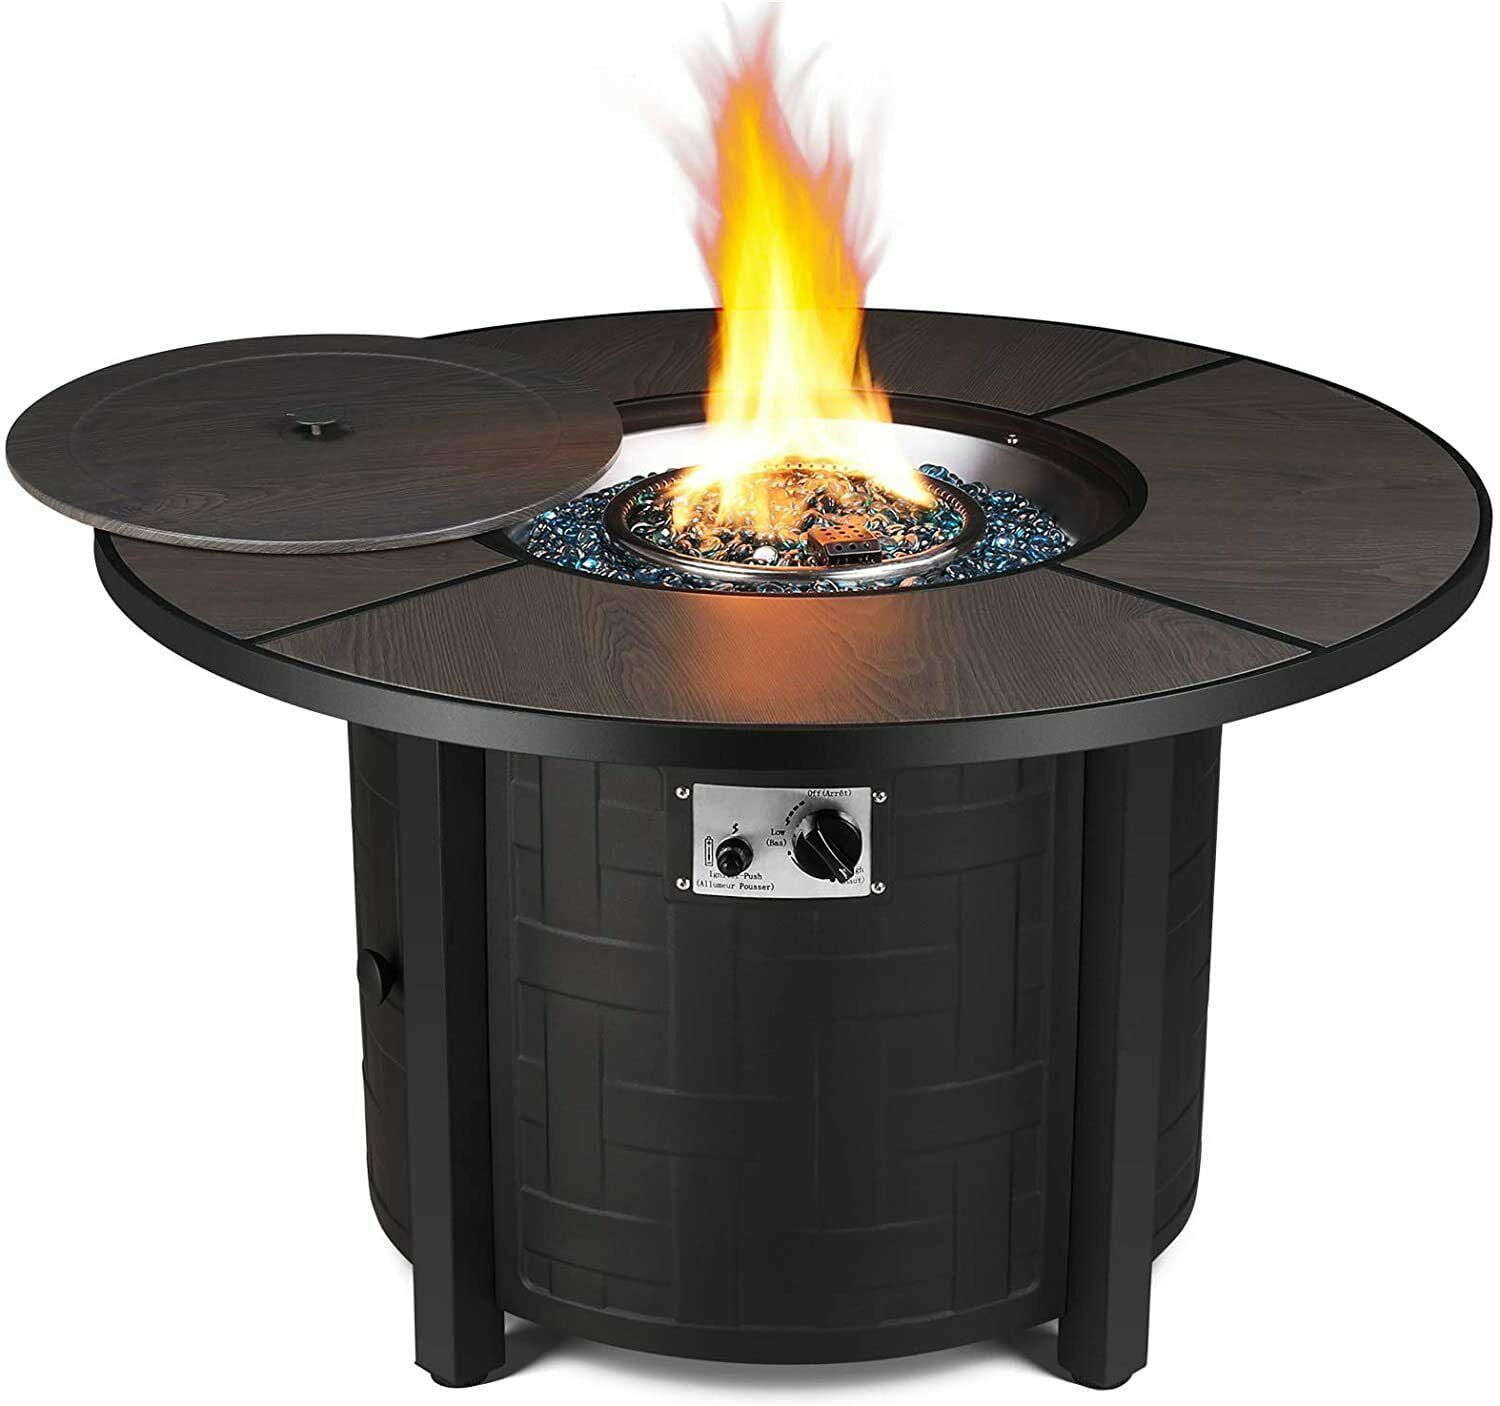 Bahom 42 Propane Gas Fire Pit Table 50, How To Convert A Wood Burning Fire Pit To Propane